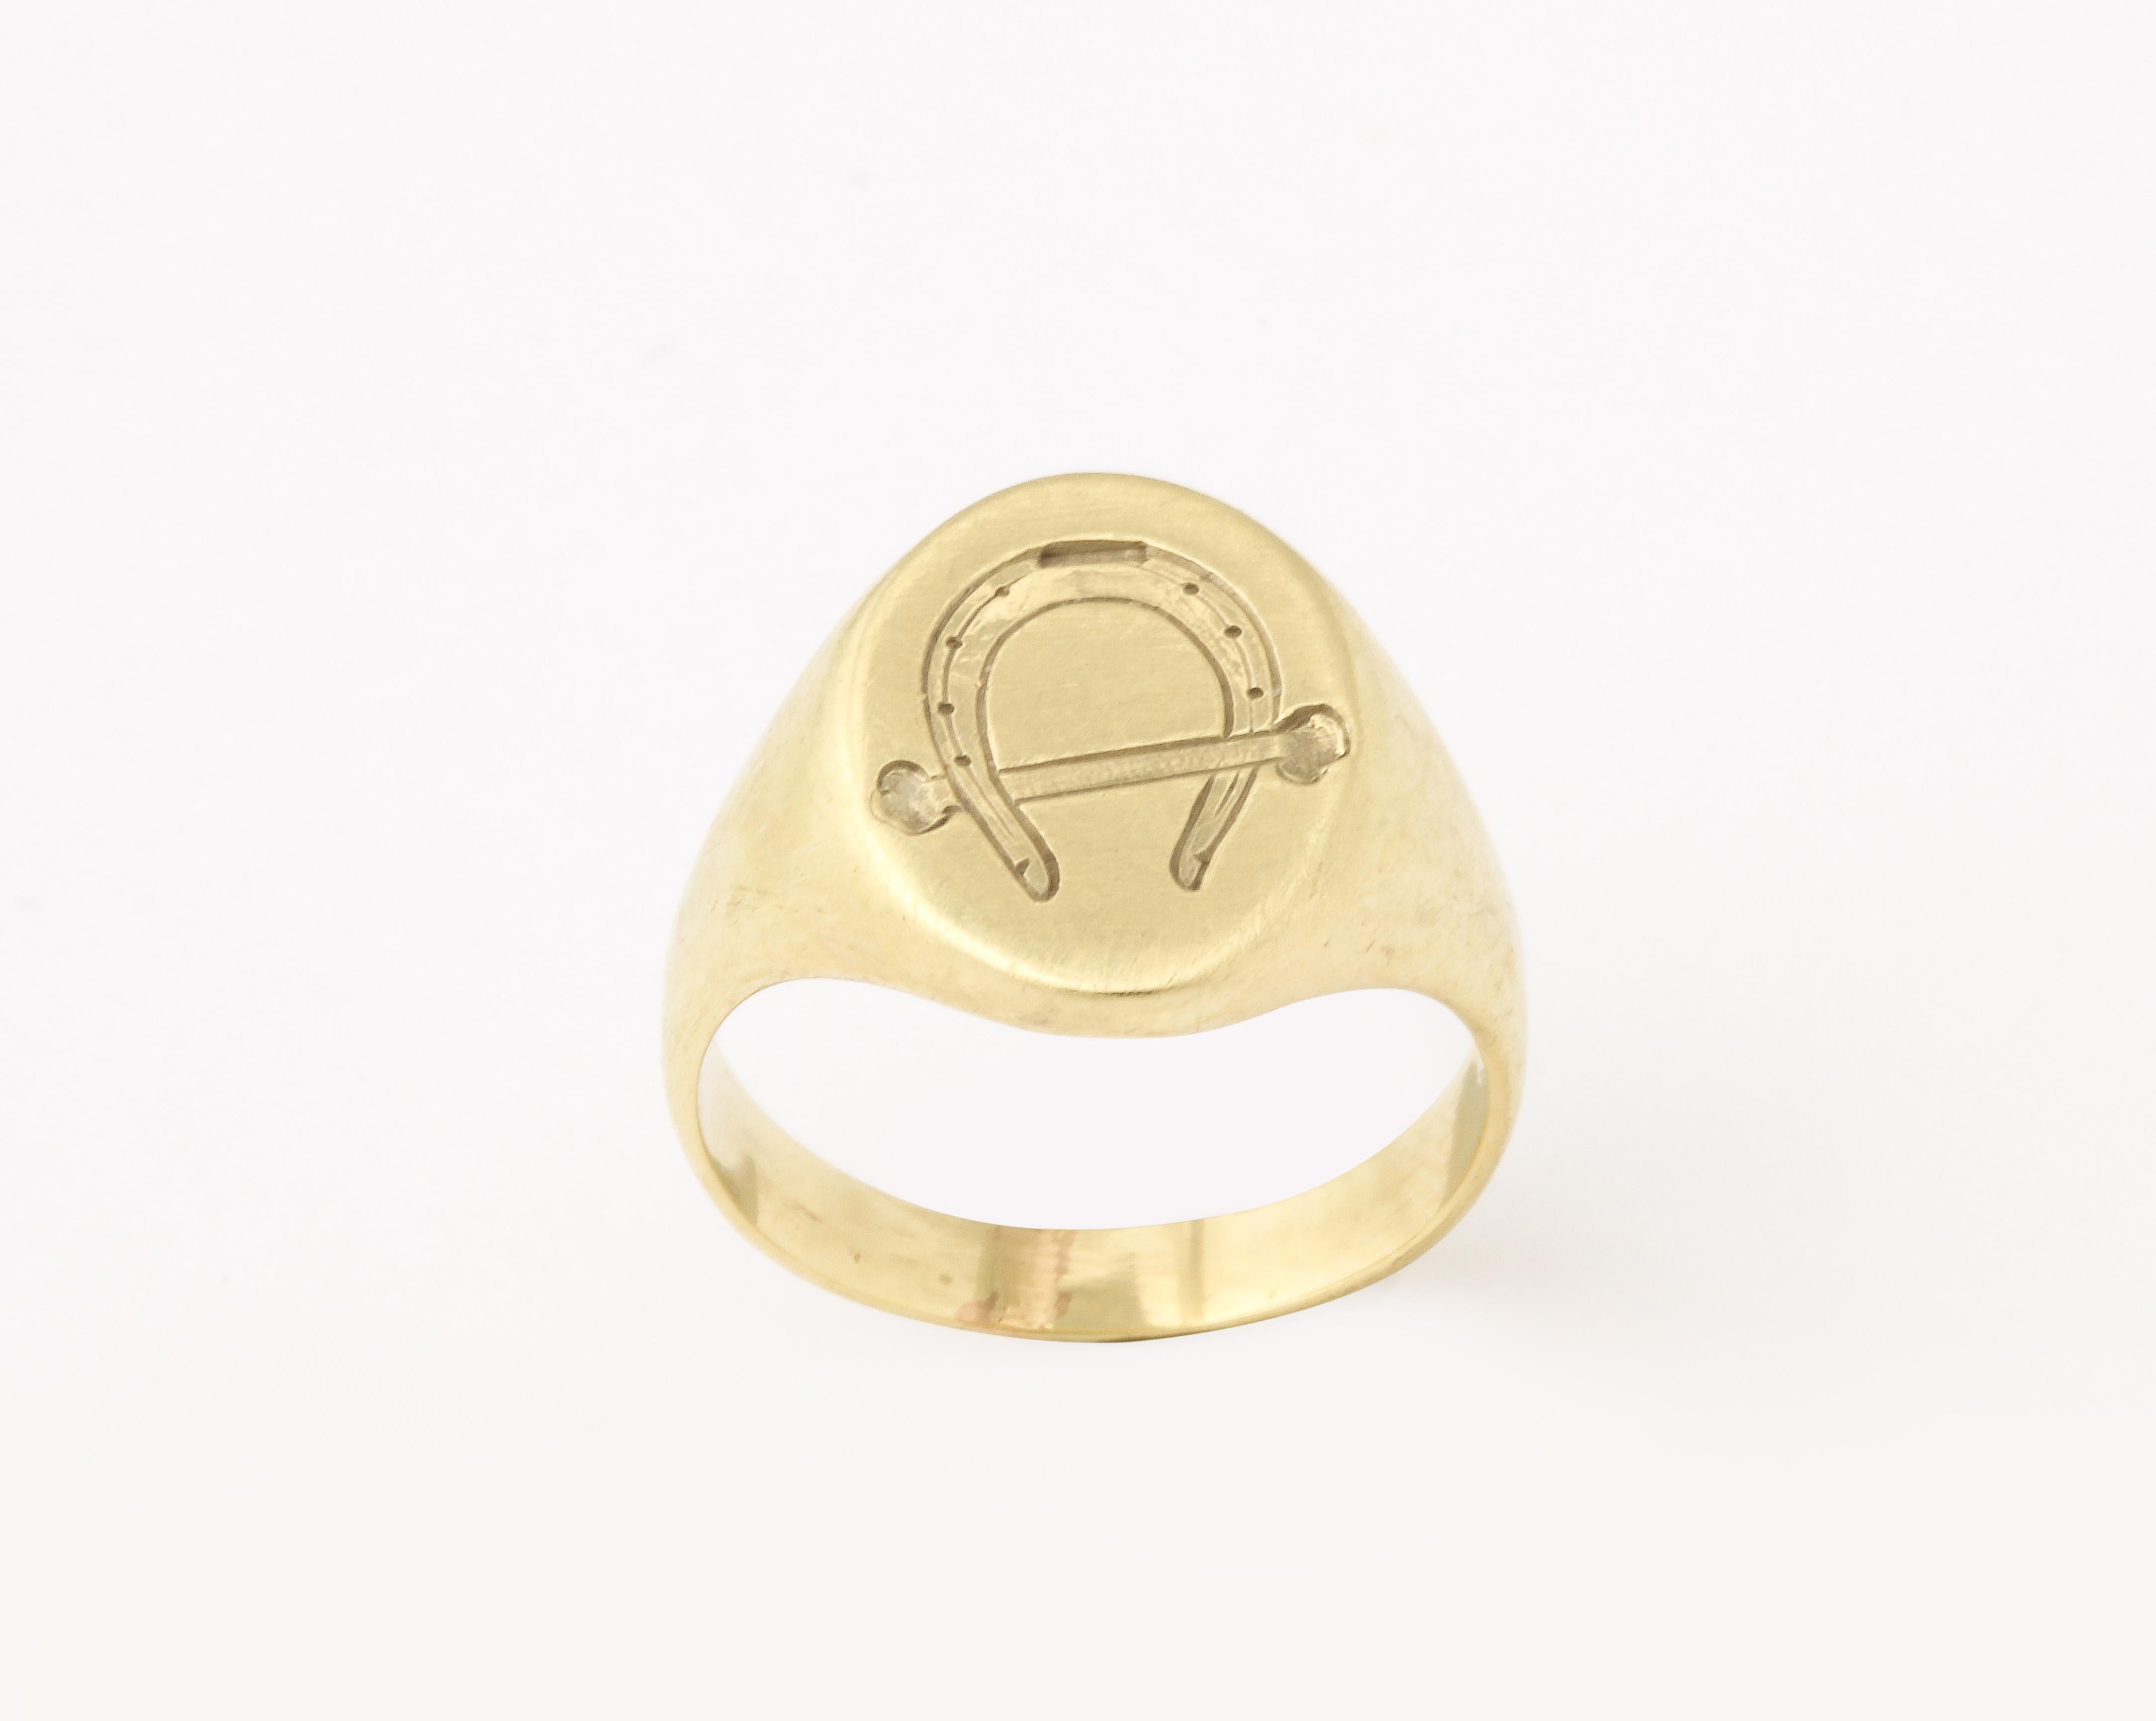 This is a lovable equestrian lover signet ring engraved with a horseshoe and a riding crop. It is a pinky ring , size 5  can be worn on the ring finger or but can be enlarged if wished. The engraving is crisp. The face measures 13.2mmx11mm. Wear it